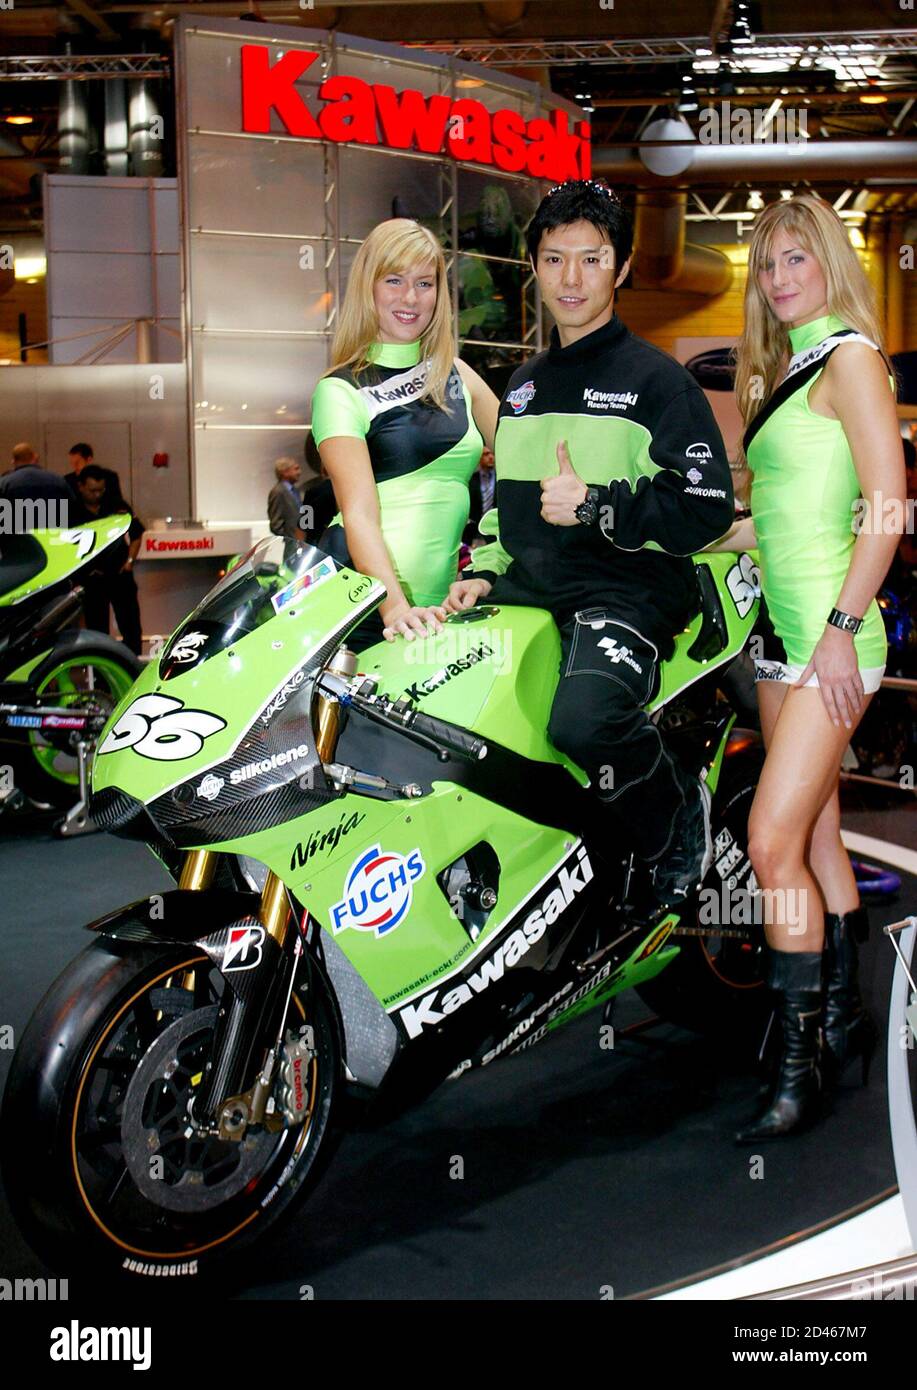 Kawasaki rider Japan's Shinya Nakano poses for photographs the ZX-RR during the International Motorcycle and Scooter Show in Birmingham, central England, 2004. REUTERS/Darren Staples DS/ASA/WS Stock Photo - Alamy